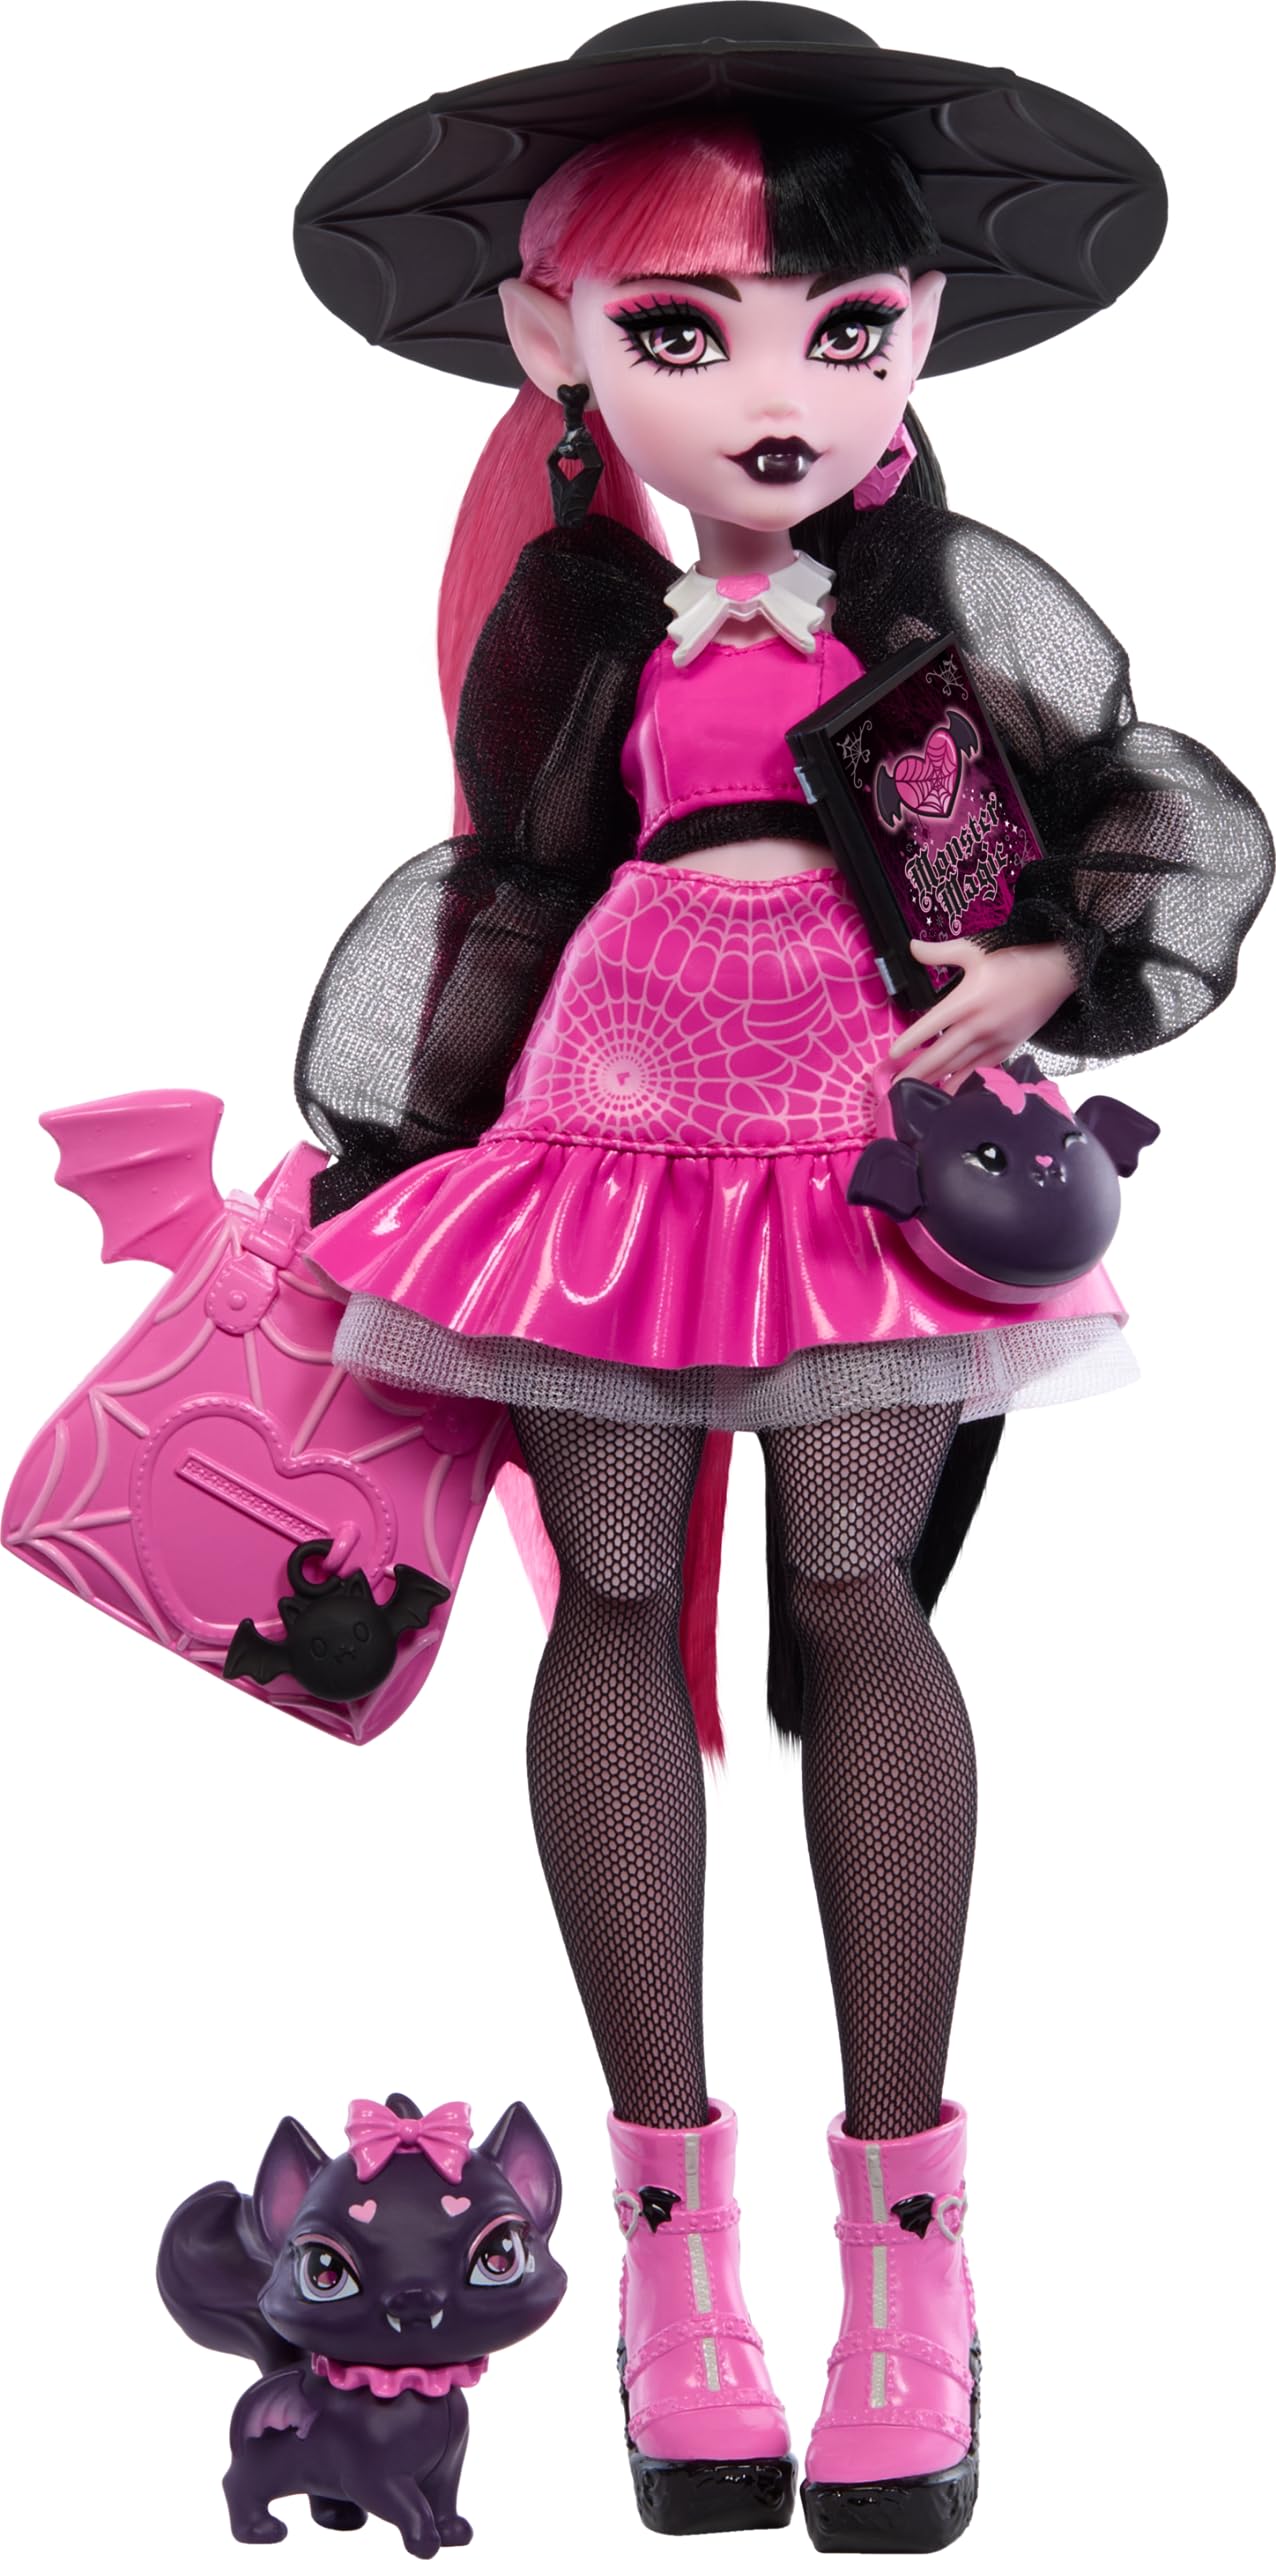 Monster High Draculaura Doll with Pet Bat-Cat Count Fabulous and Accessories like Backpack, Spell Book, Bento Box and More